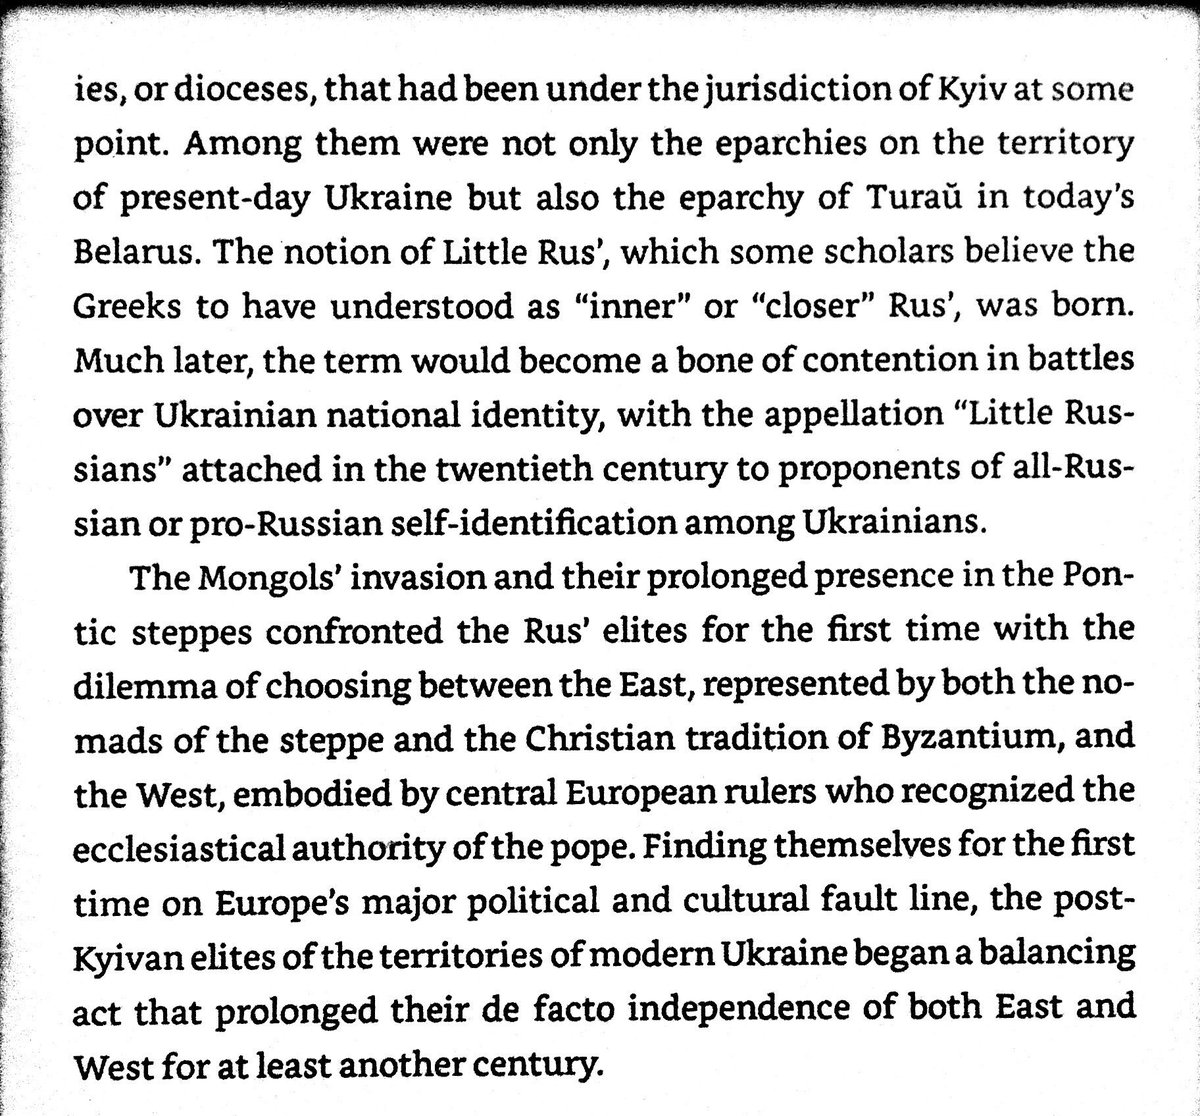 Galicia aligned with Catholics against Mongols, alienating Orthodox. Thus Metropolitan of Russia was relocated away from Kiev to central Russia. As compensation, new Orthodox metropolitan set up in Galicia. Two religous hierarchies for East Slavs.